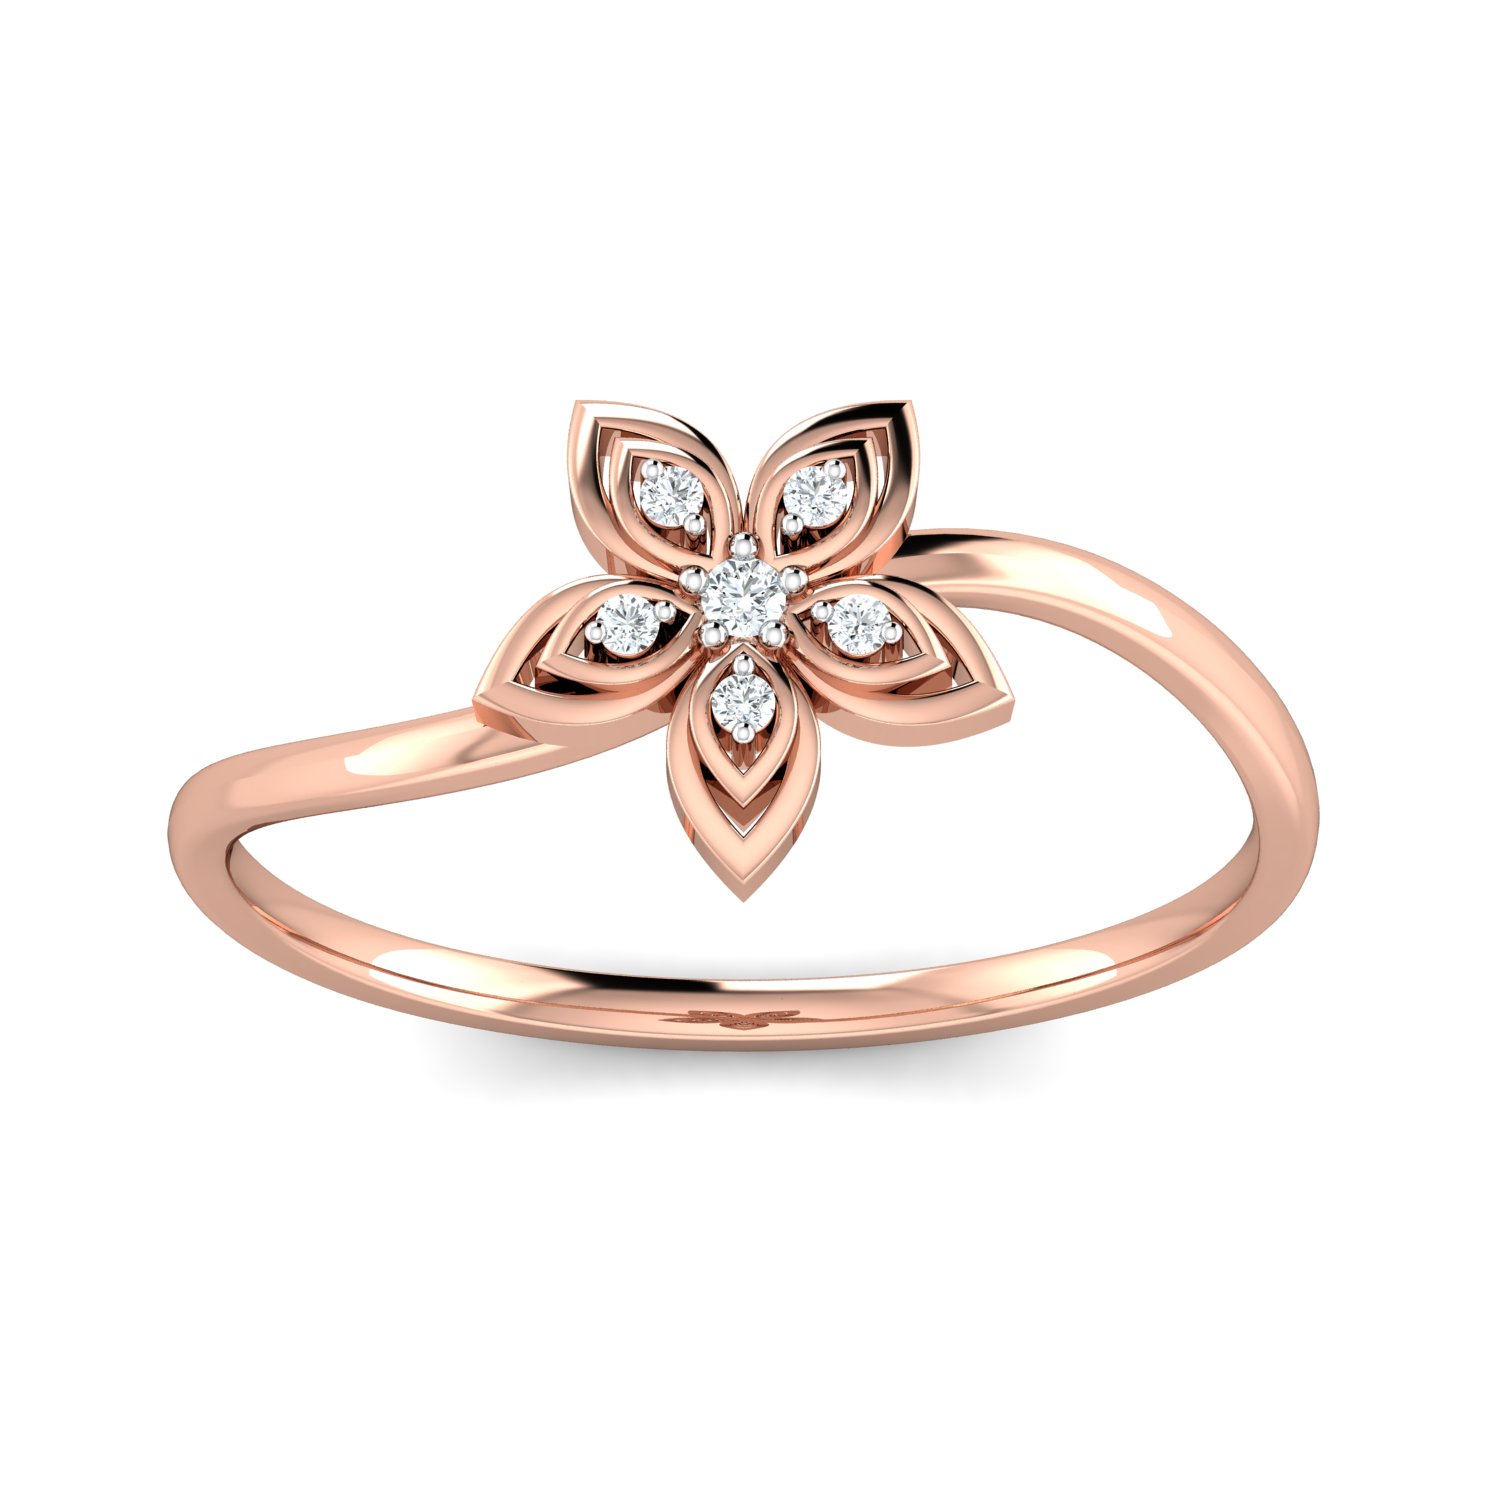 New Dual Floret Gold Ring